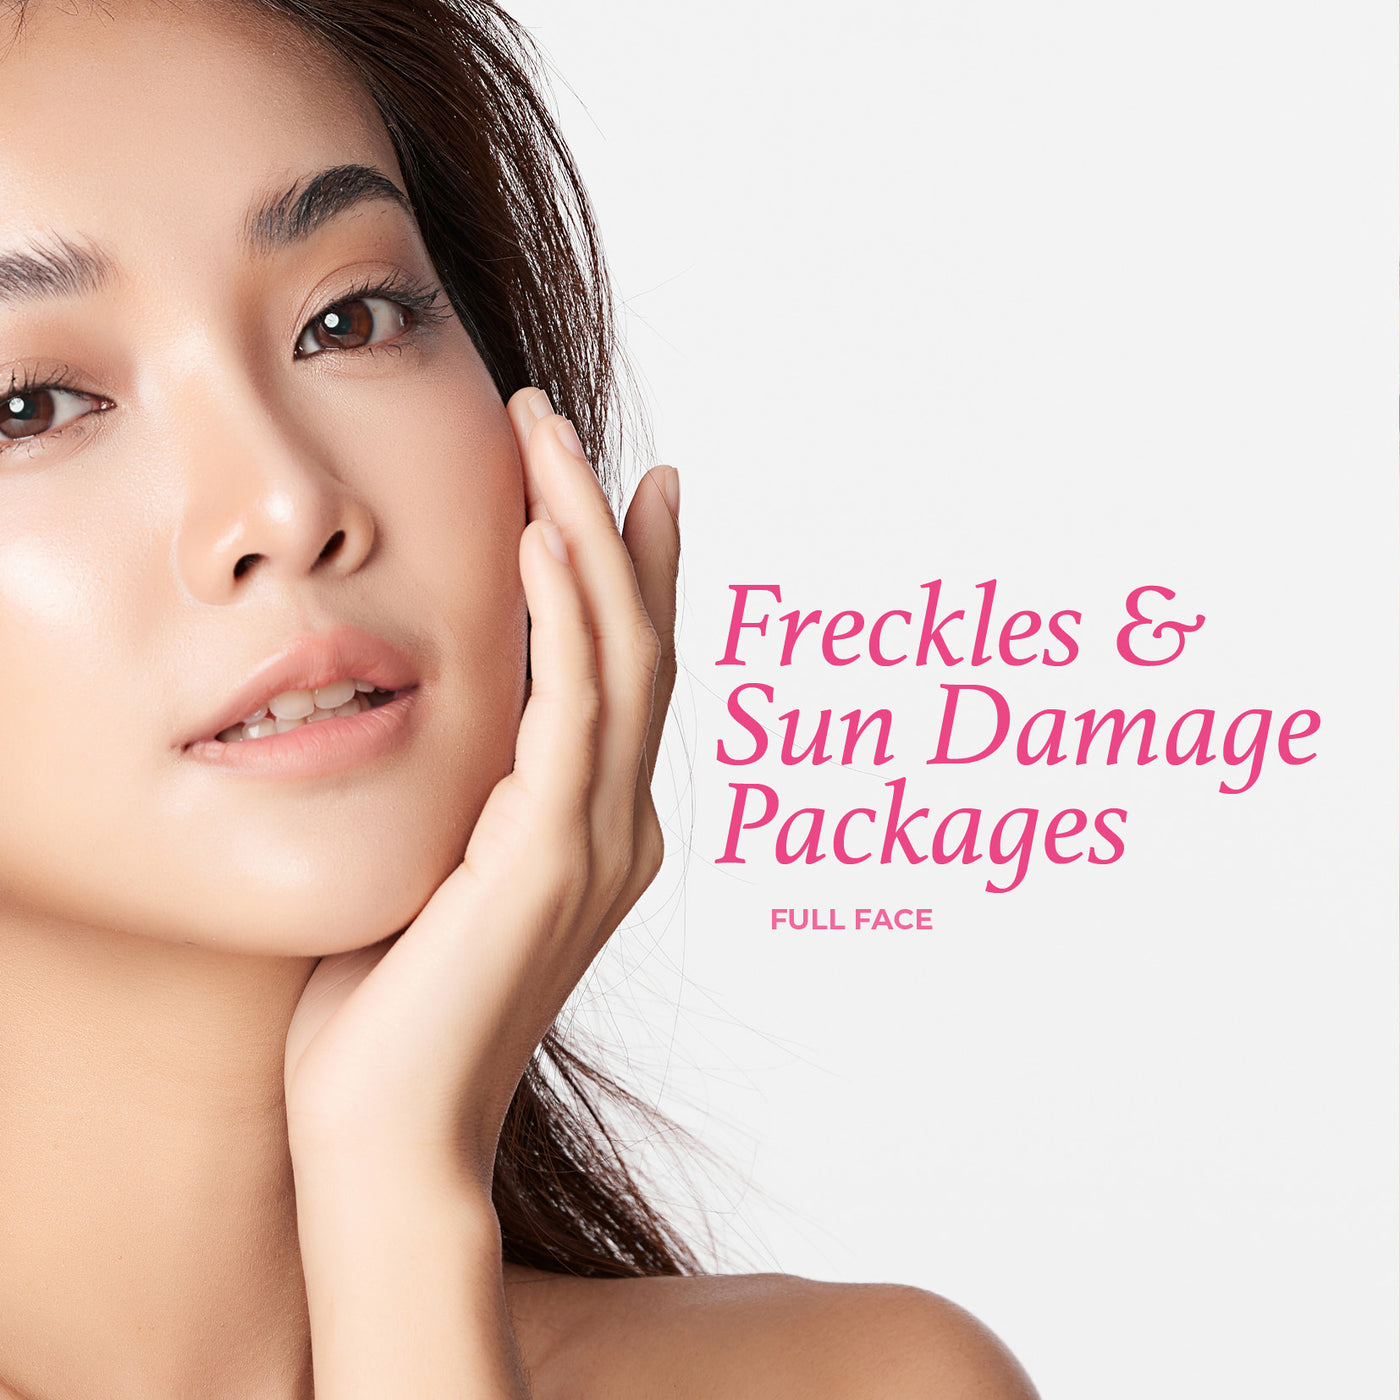 Freckles & Sun Damage Package - Full Face